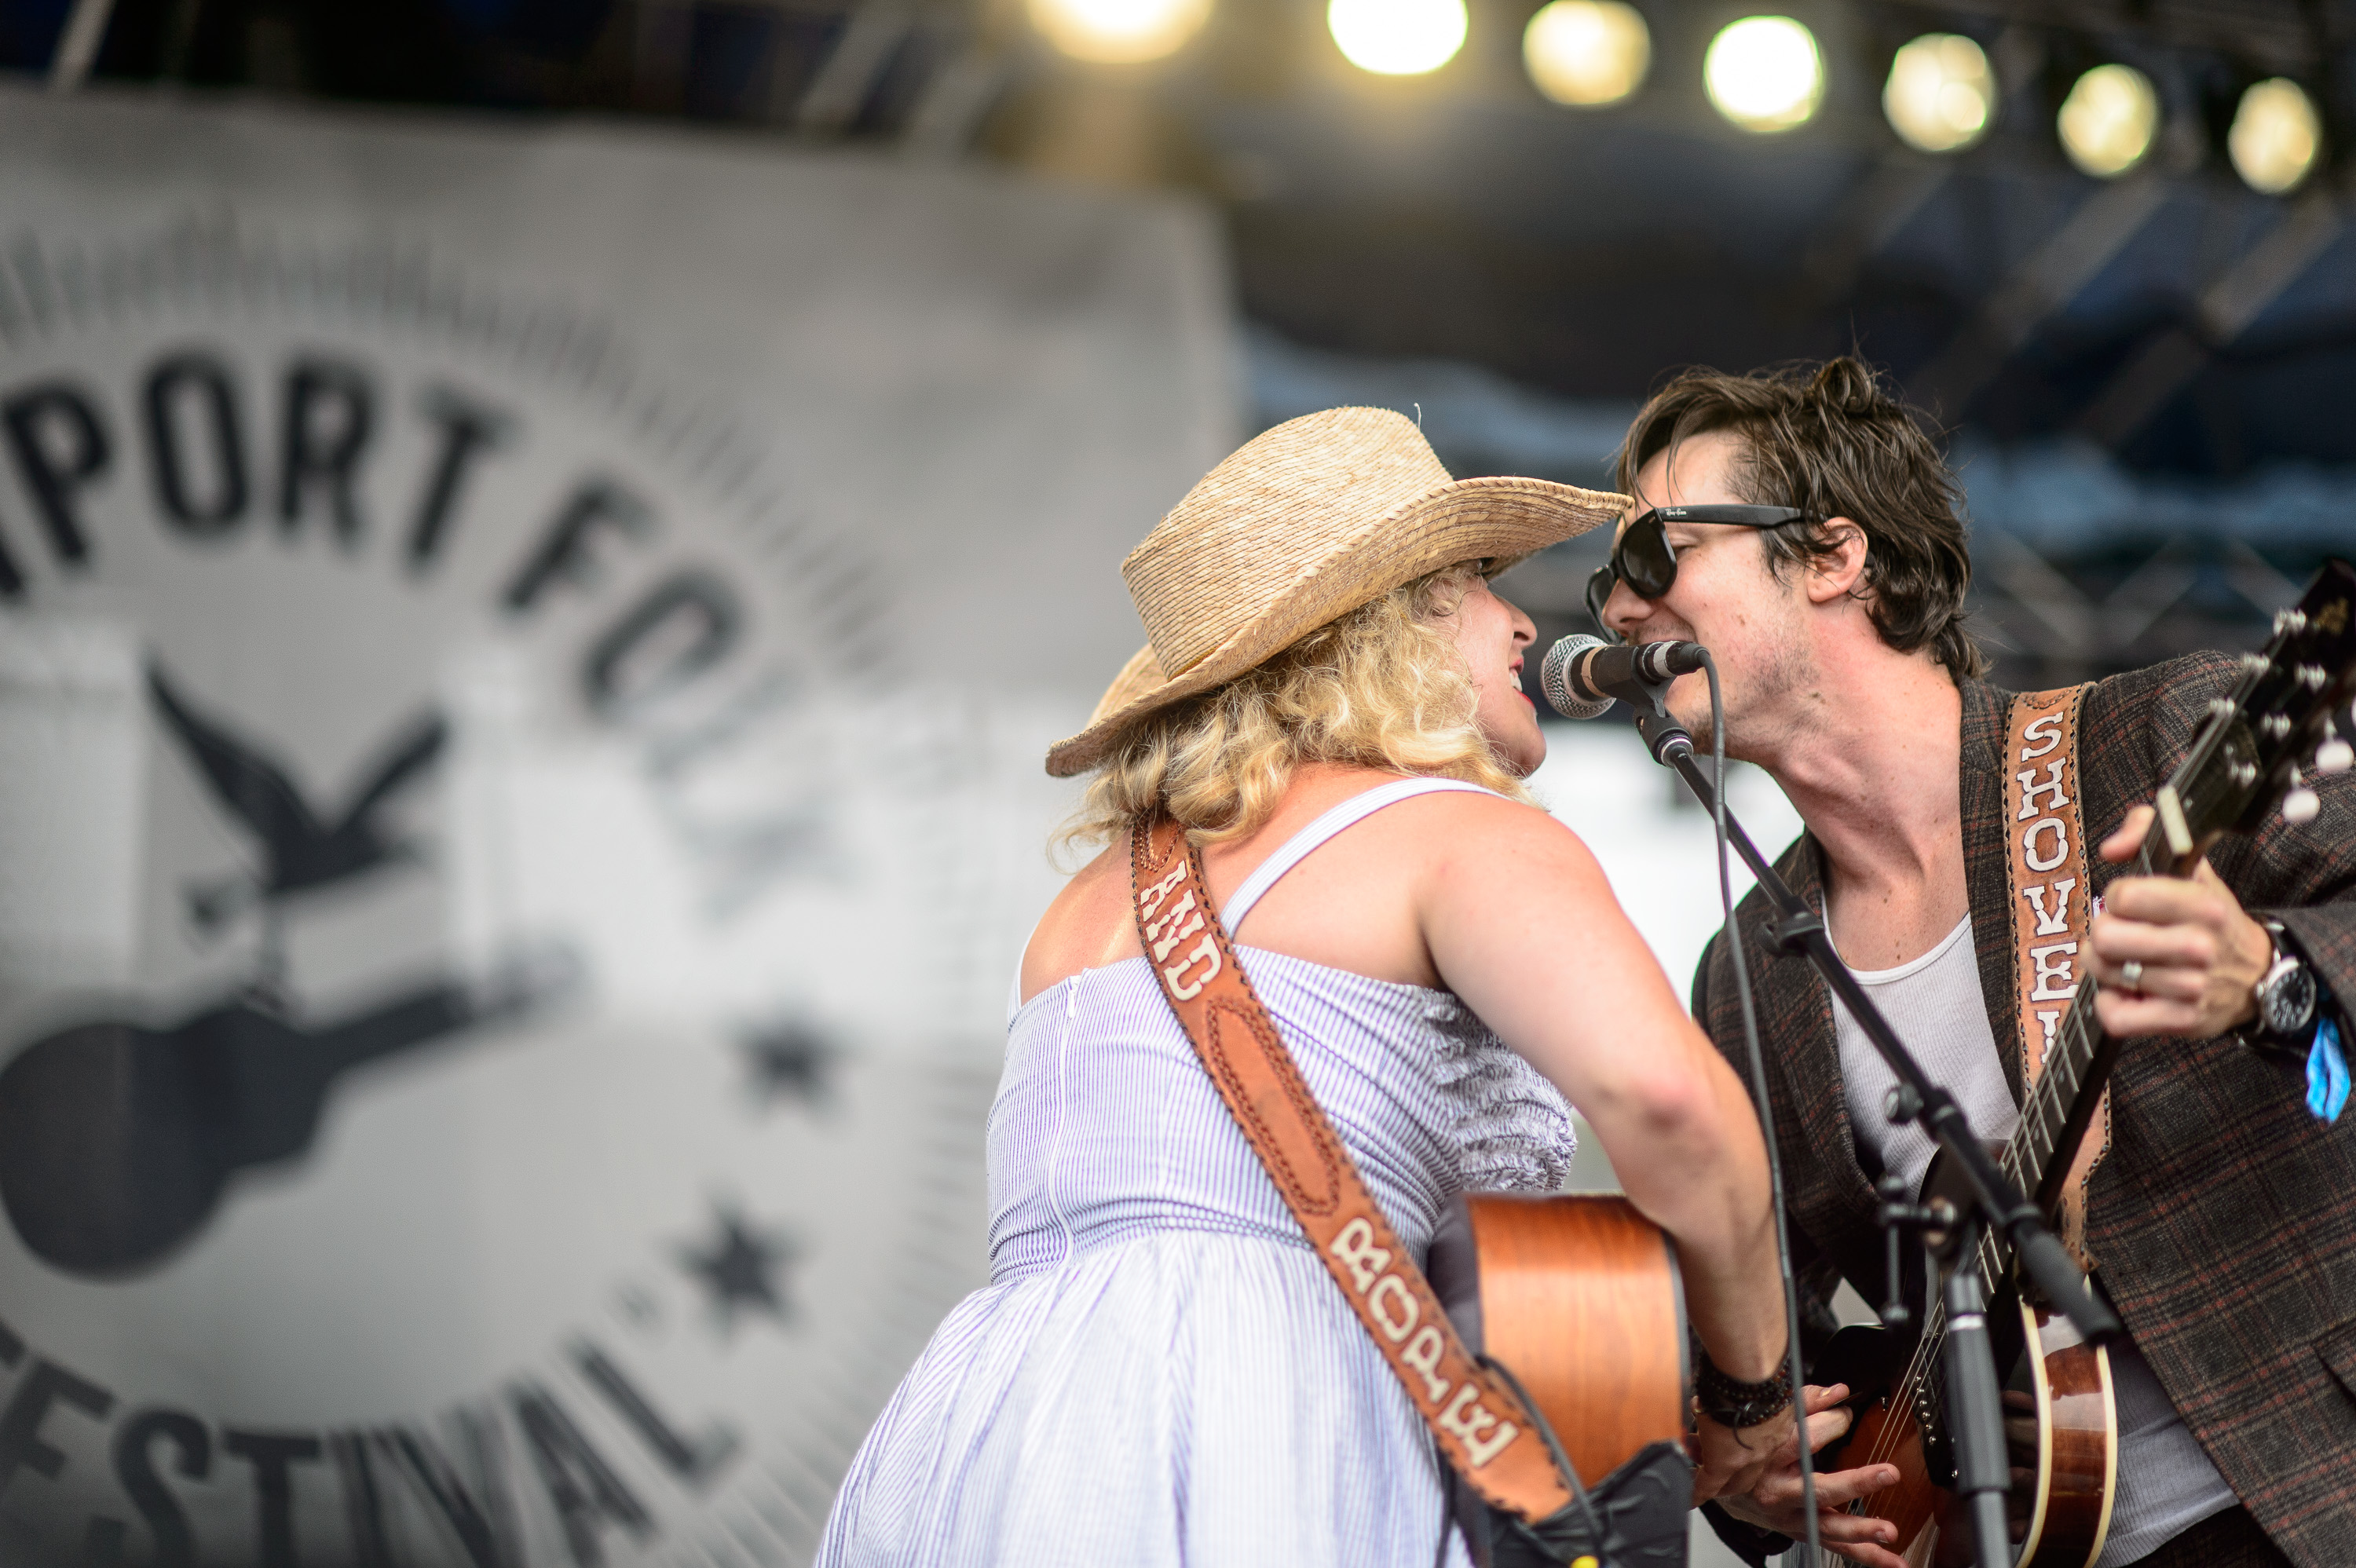 Shovels & Rope performs at the 2014 Newport Folk Festival